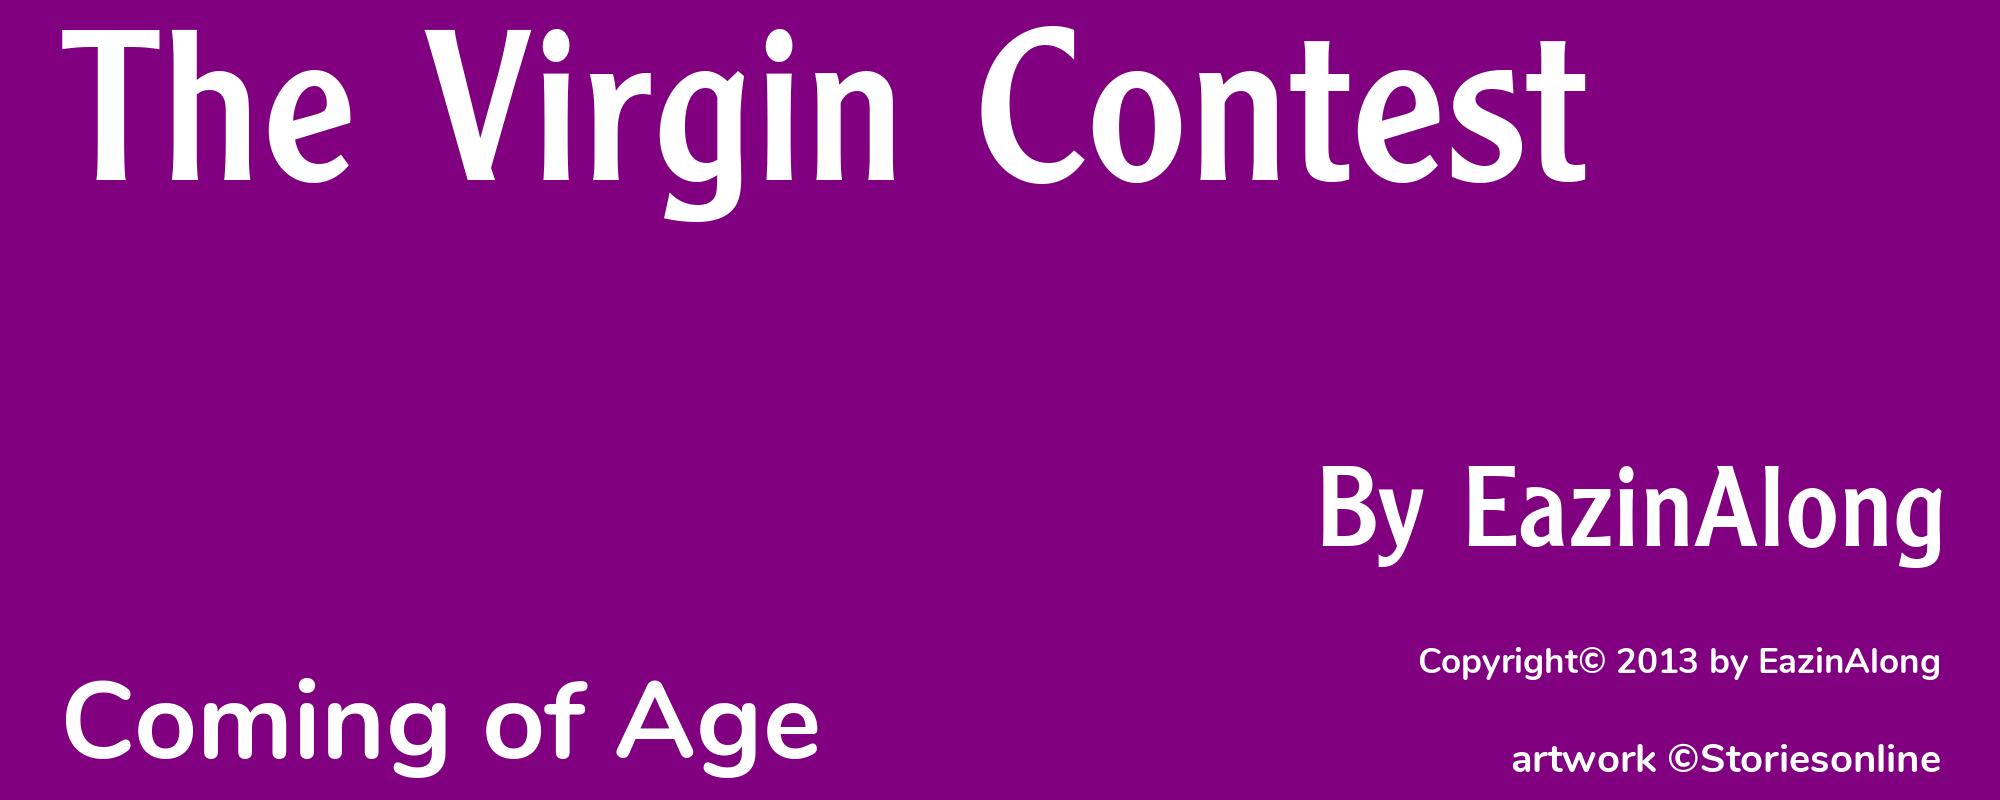 The Virgin Contest - Cover